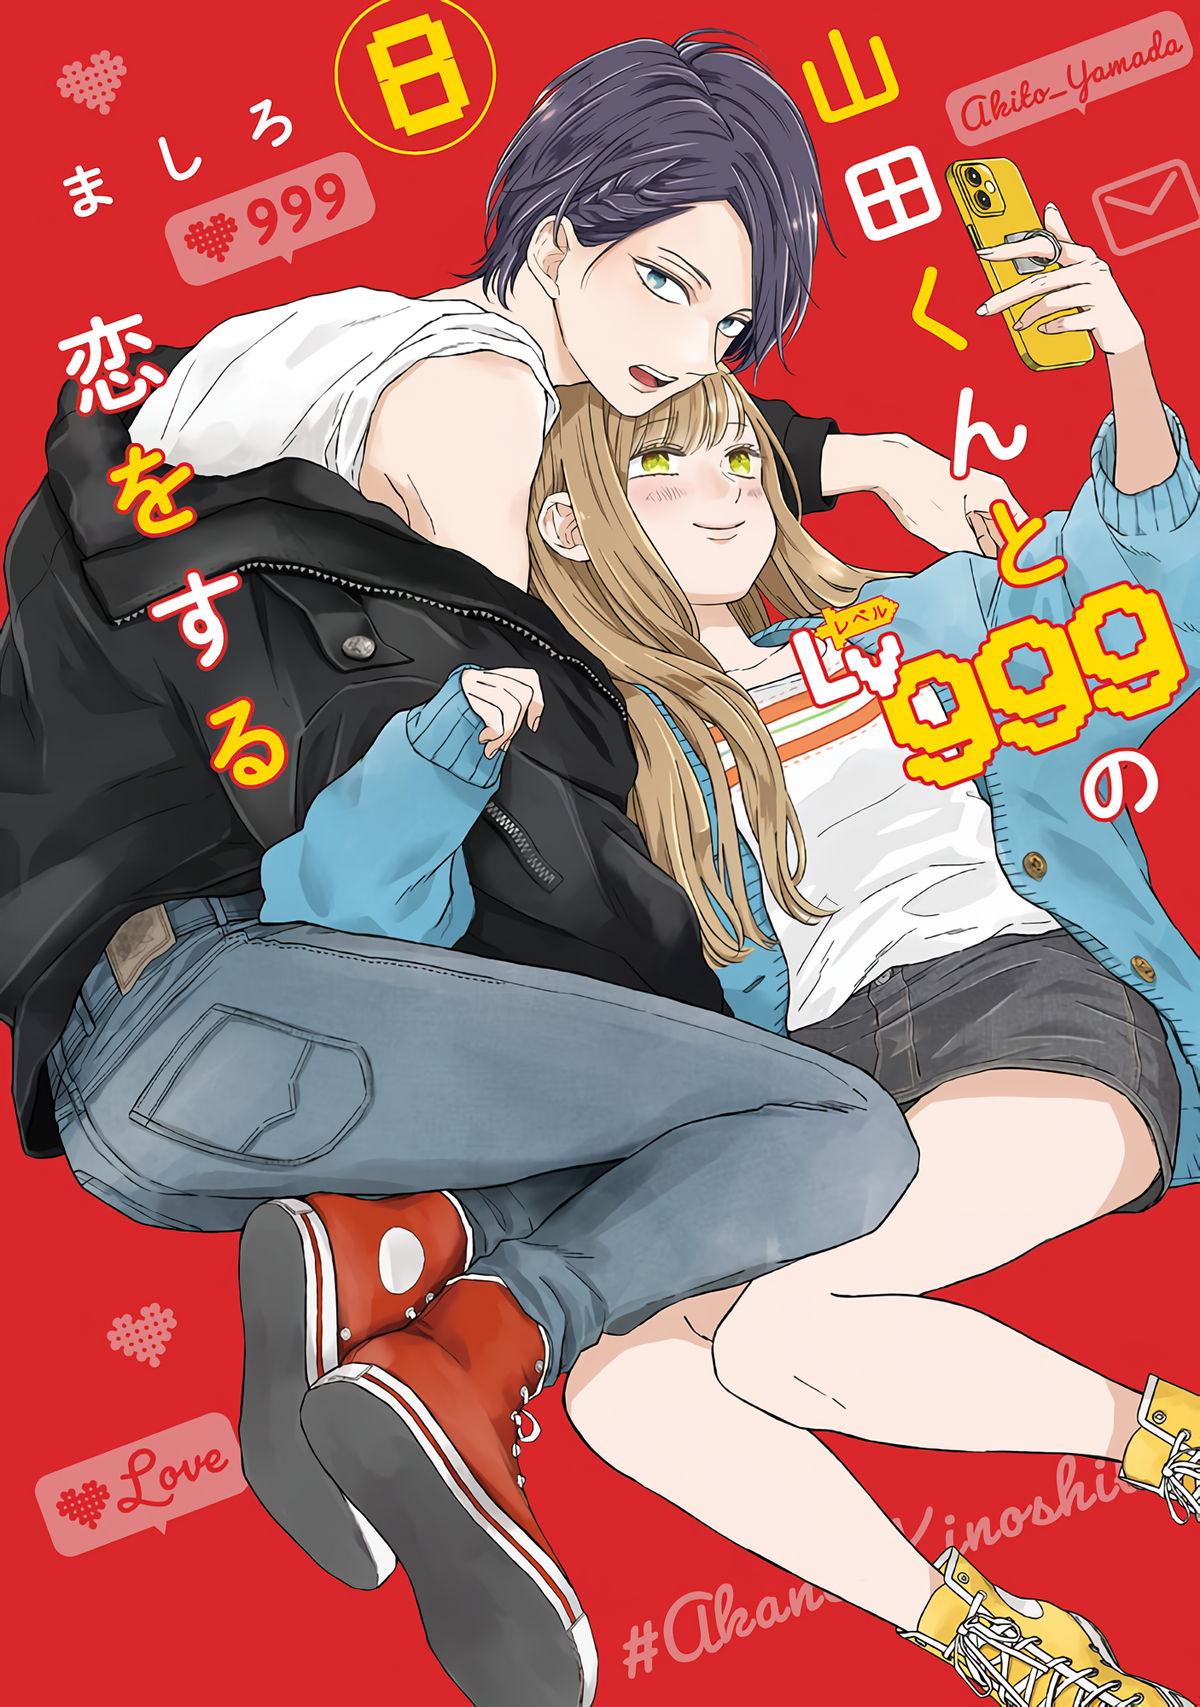 My Love Story With Yamada-kun at Lv999 Volume 8 cover❤️